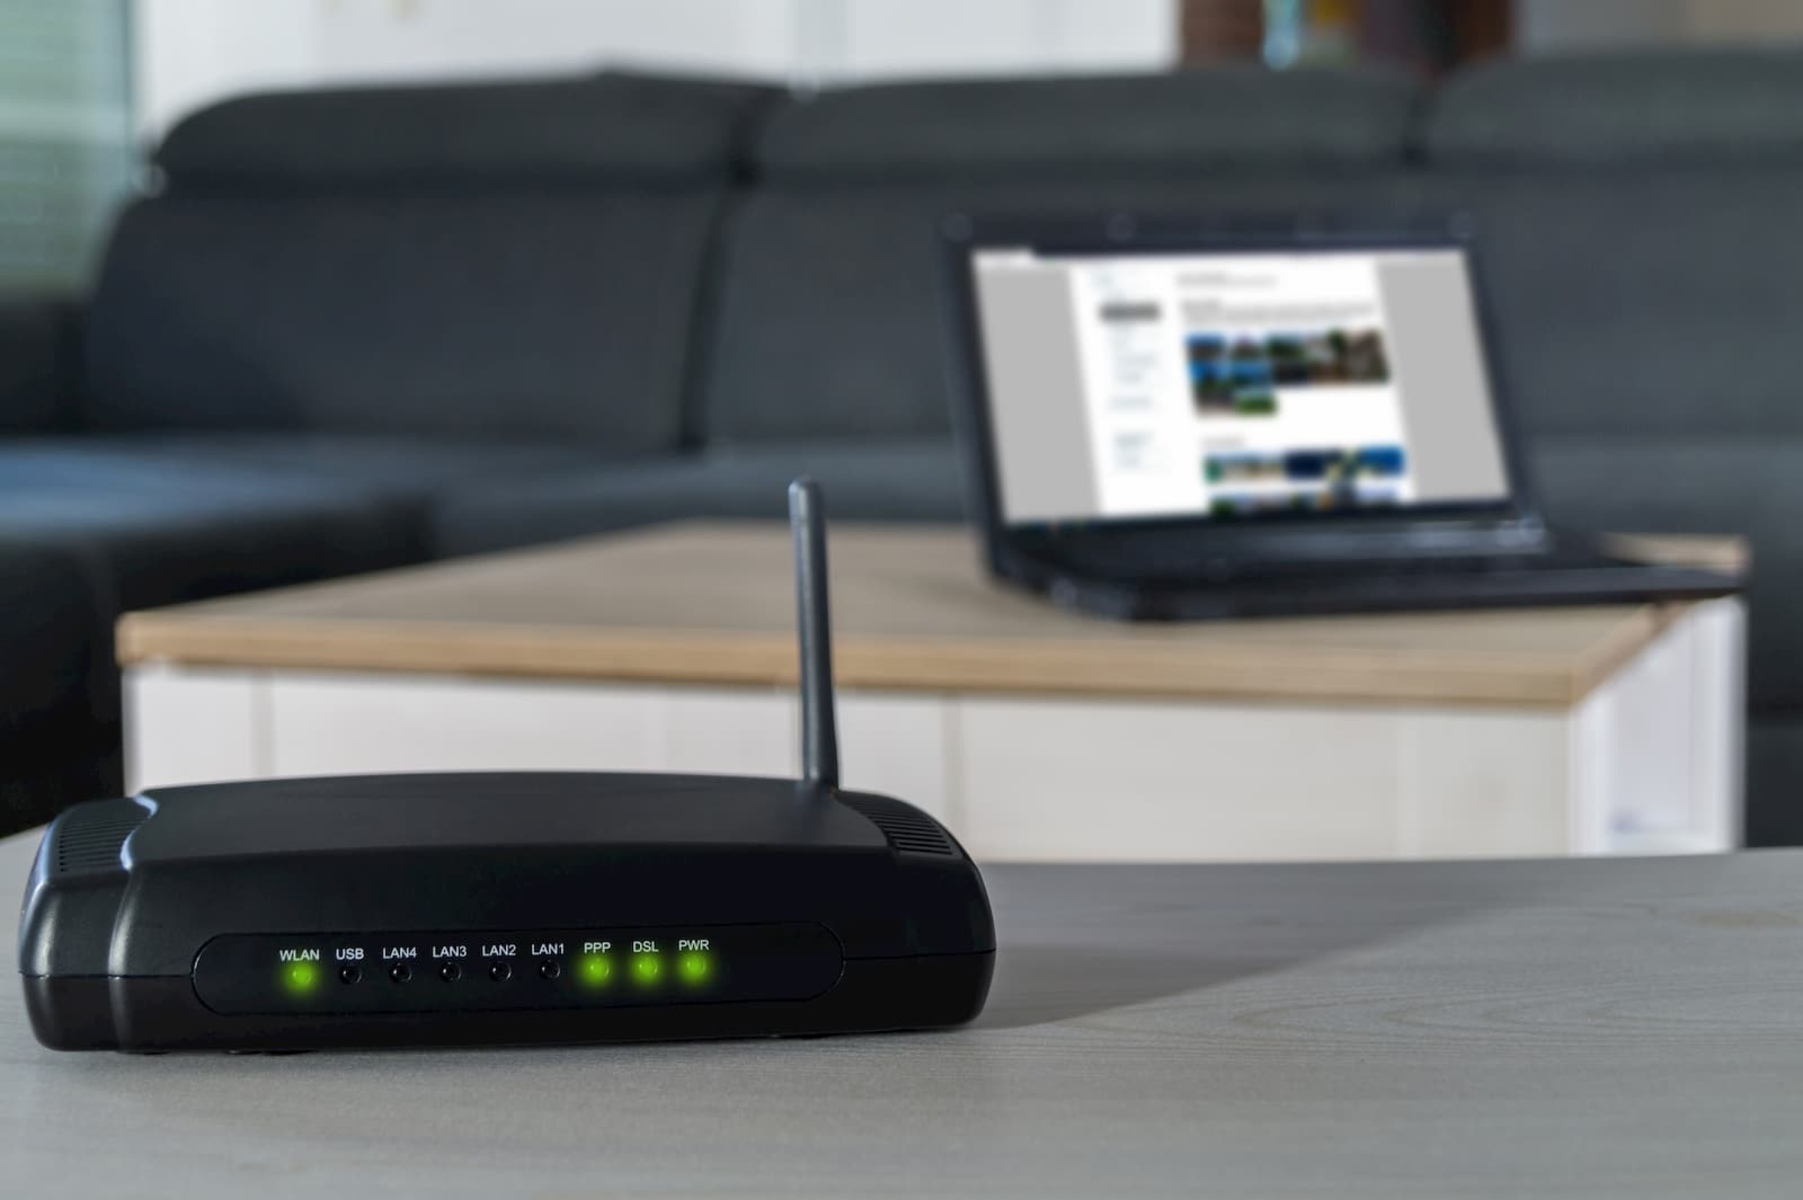 How To Connect Laptop With Wireless Router